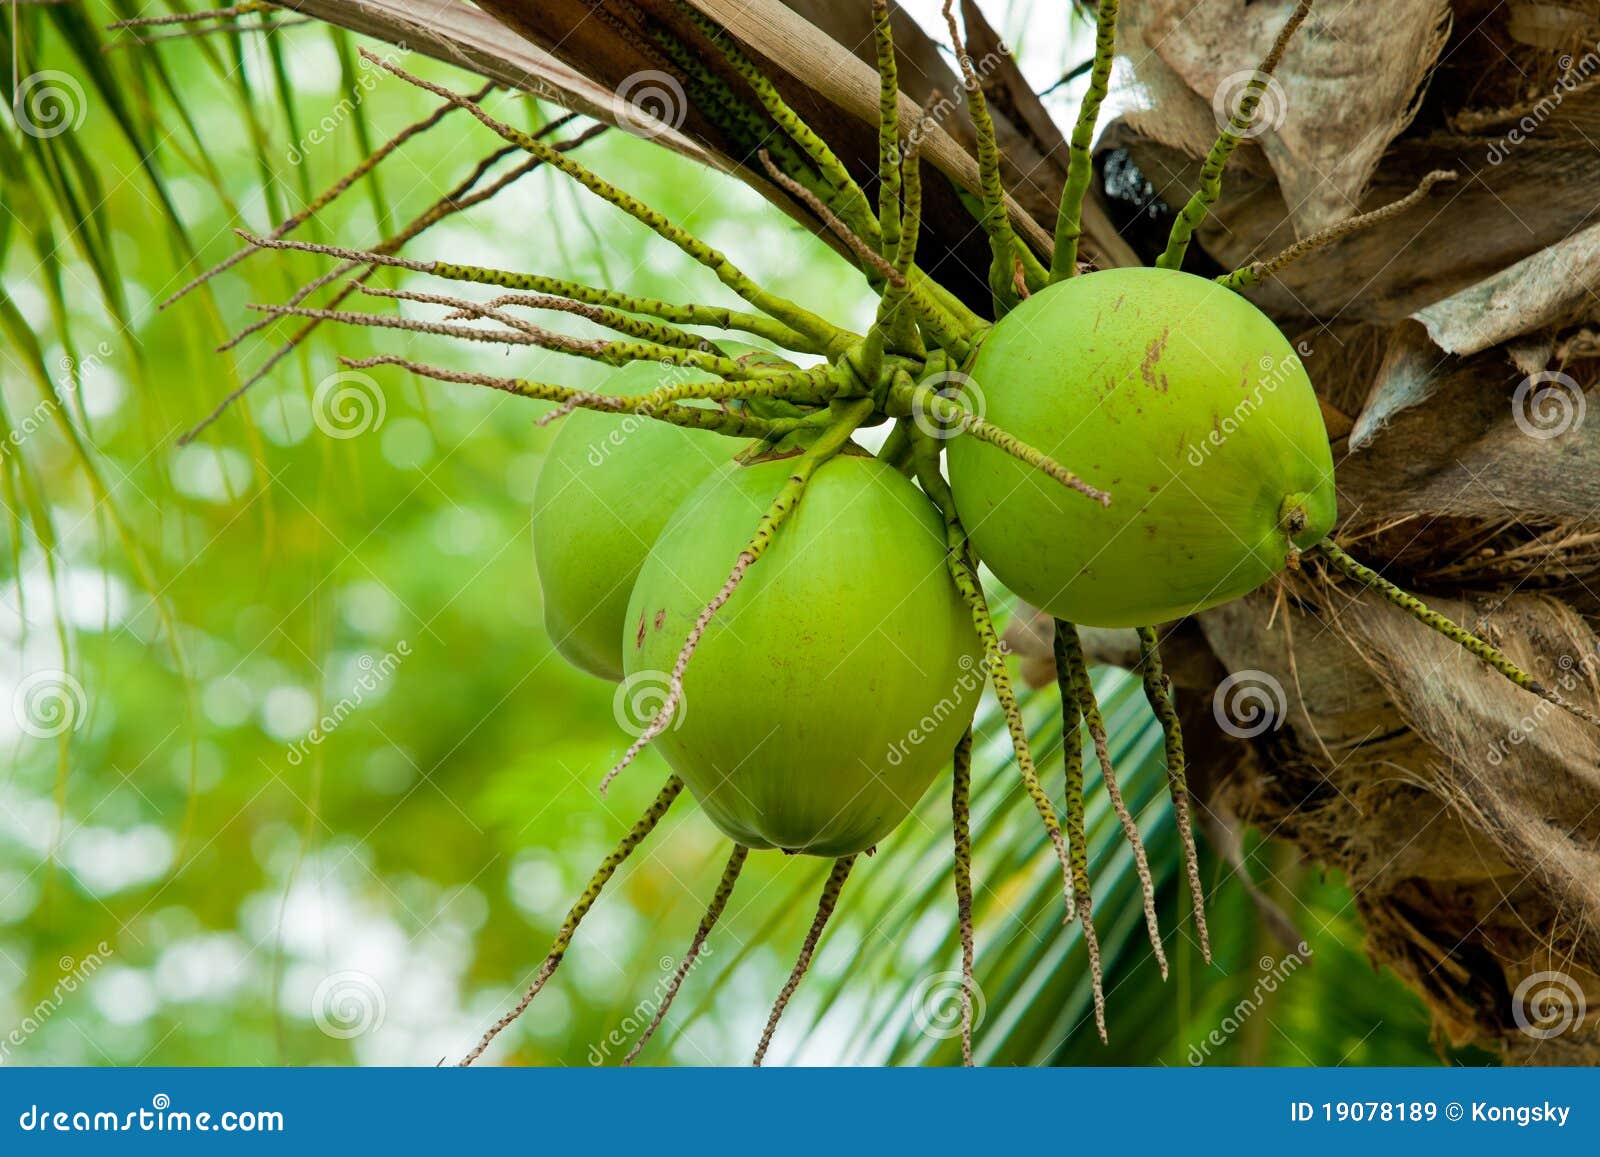 An Image of Fresh Young Coconut Stock Image - Image of farm, botany ...